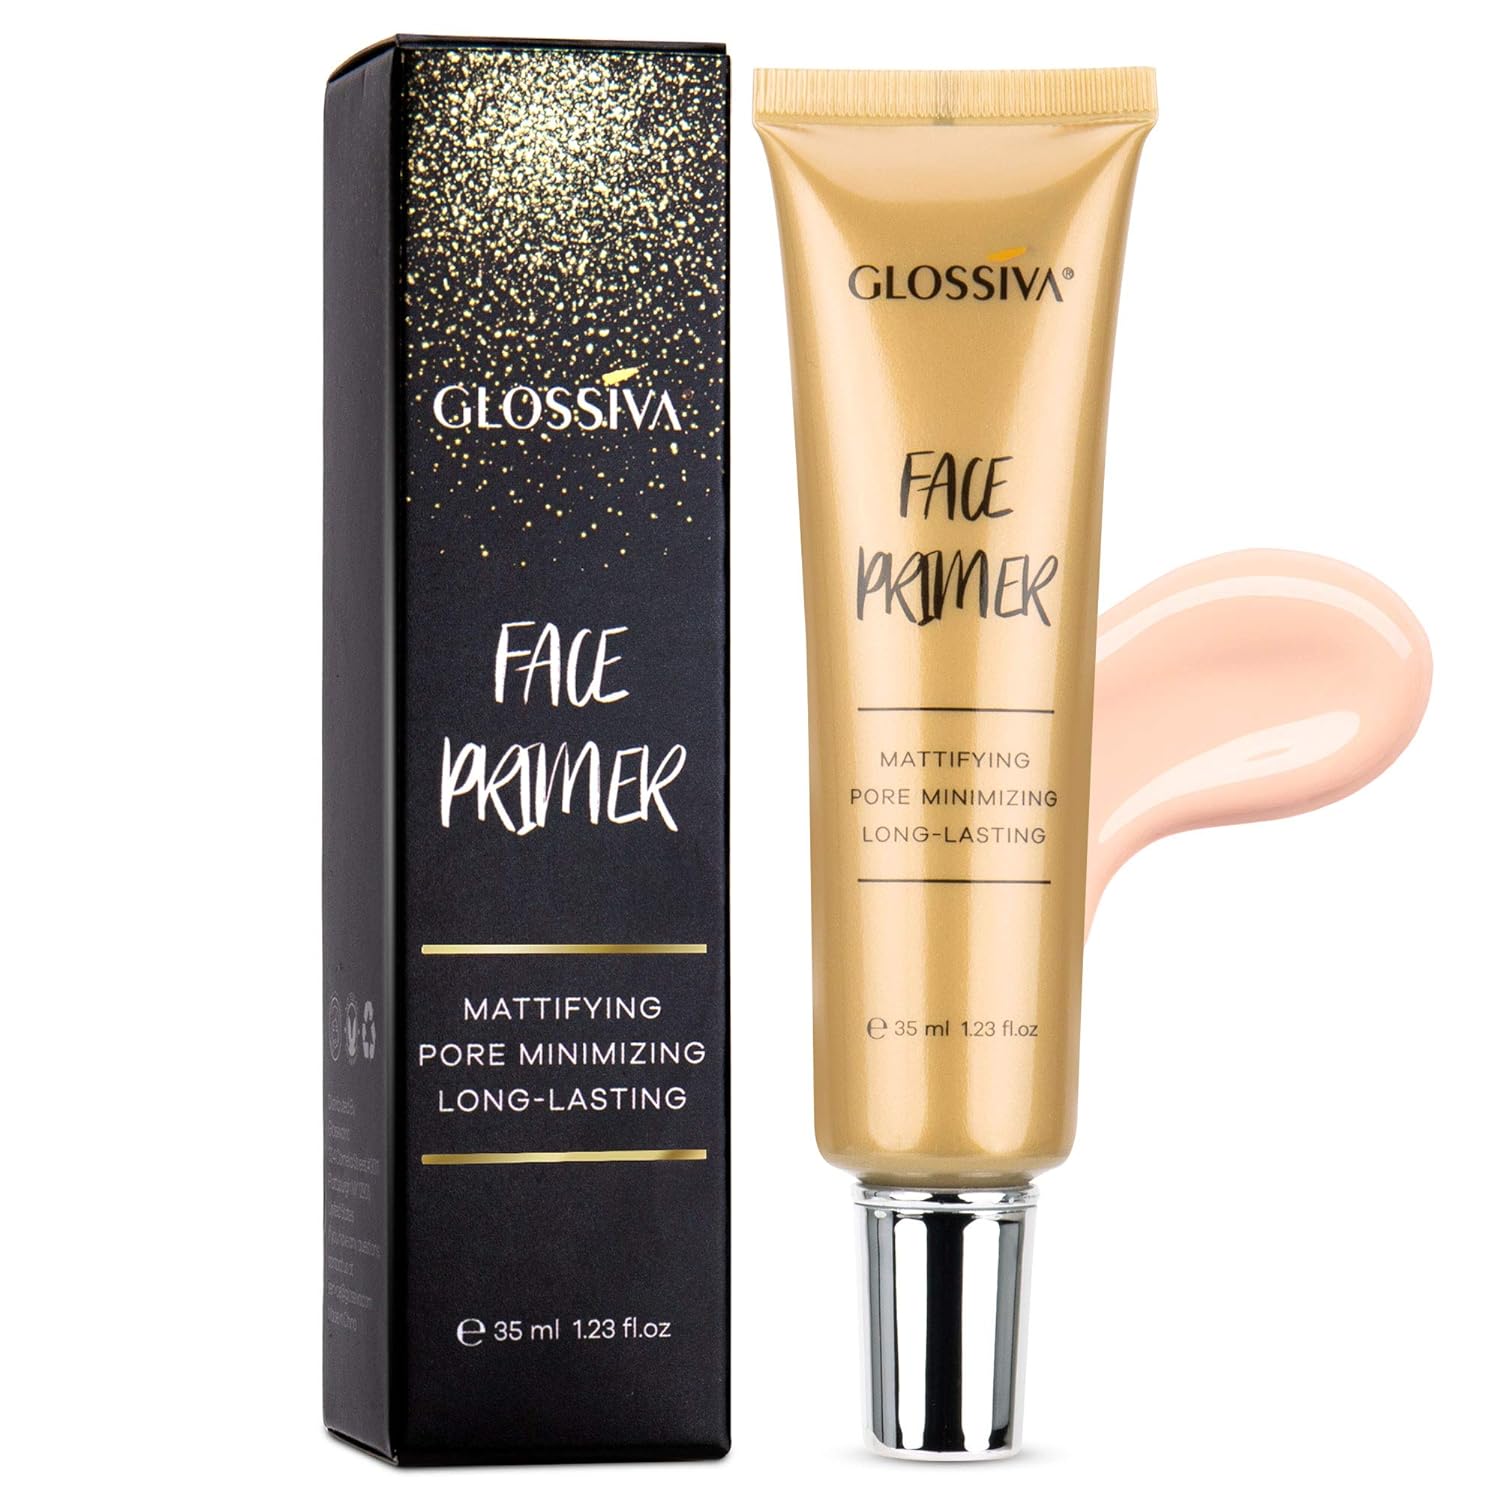  Glossiva Face Primer Matte - Big Pores Perfect Cover, Skin Flawless and Glowing, Long Lasting Makeups Staying- Nourishes & Moisturizes, Suitable for All Skin Types 35ml